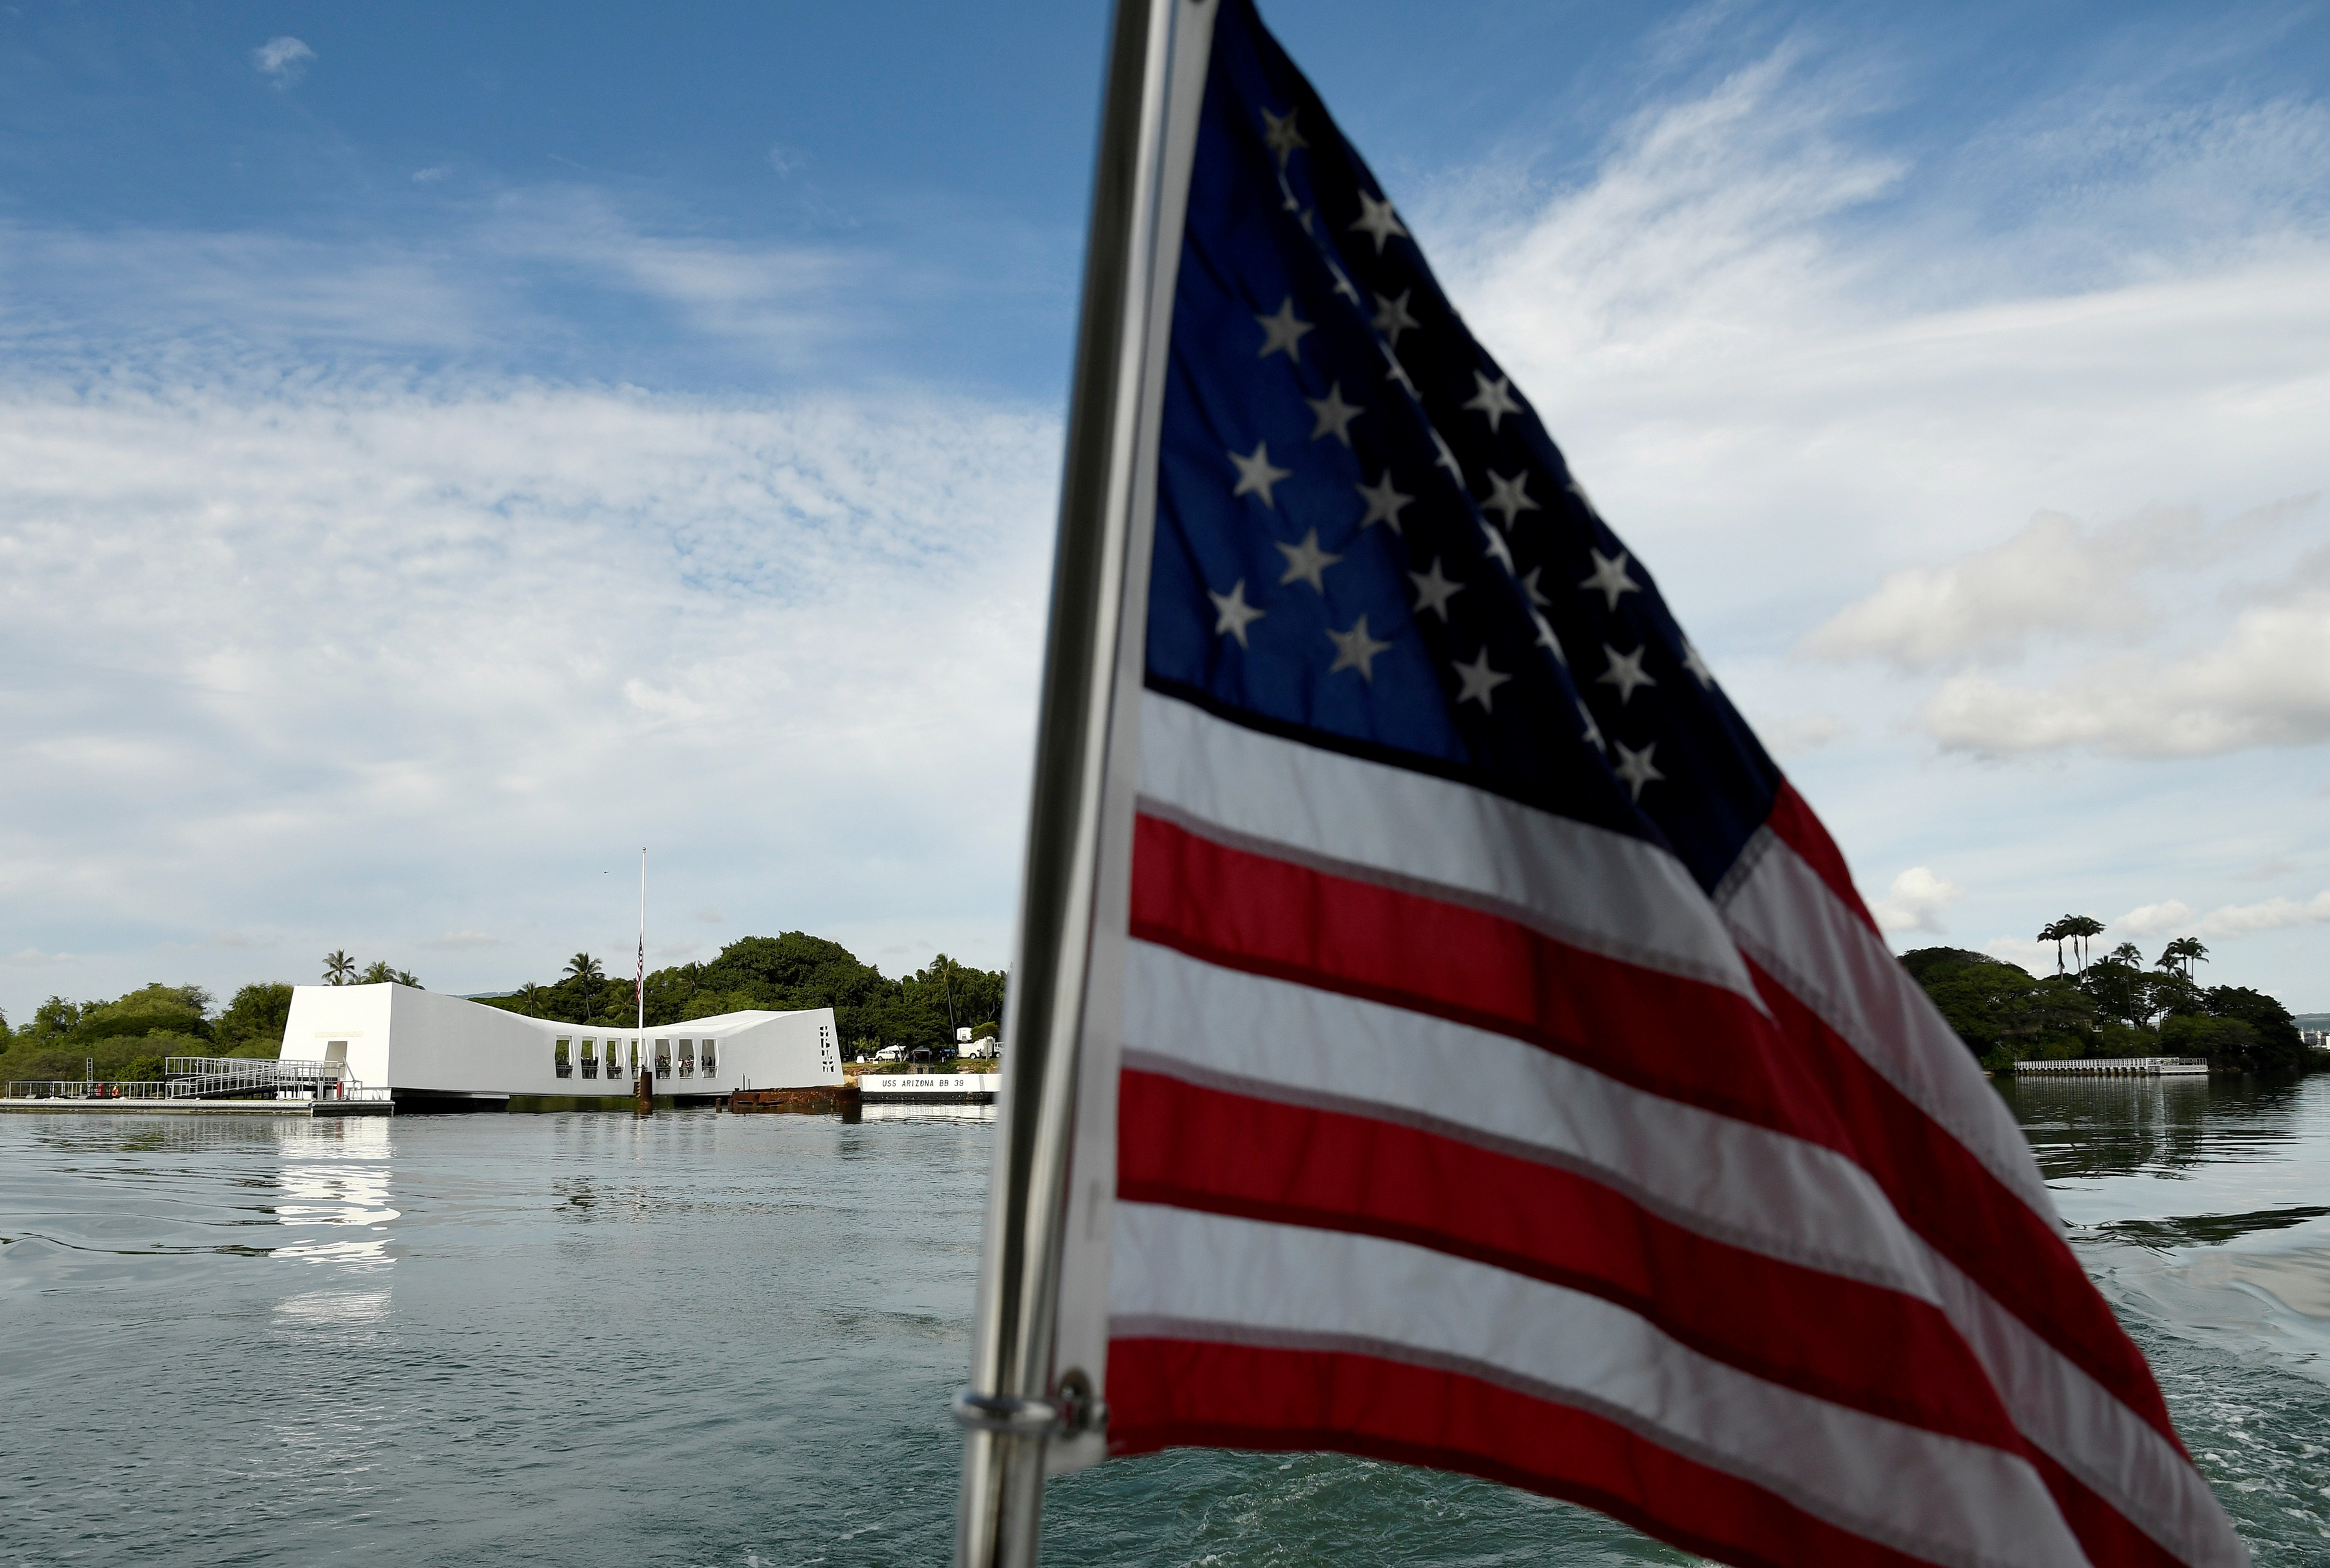 The USS Arizona Memorial can be seen from a shuttle boat during the 75th anniversary of the attack on Pearl Harbor in Honolulu, Hawaii December 7, 2016. REUTERS/Hugh Gentry/File Photo